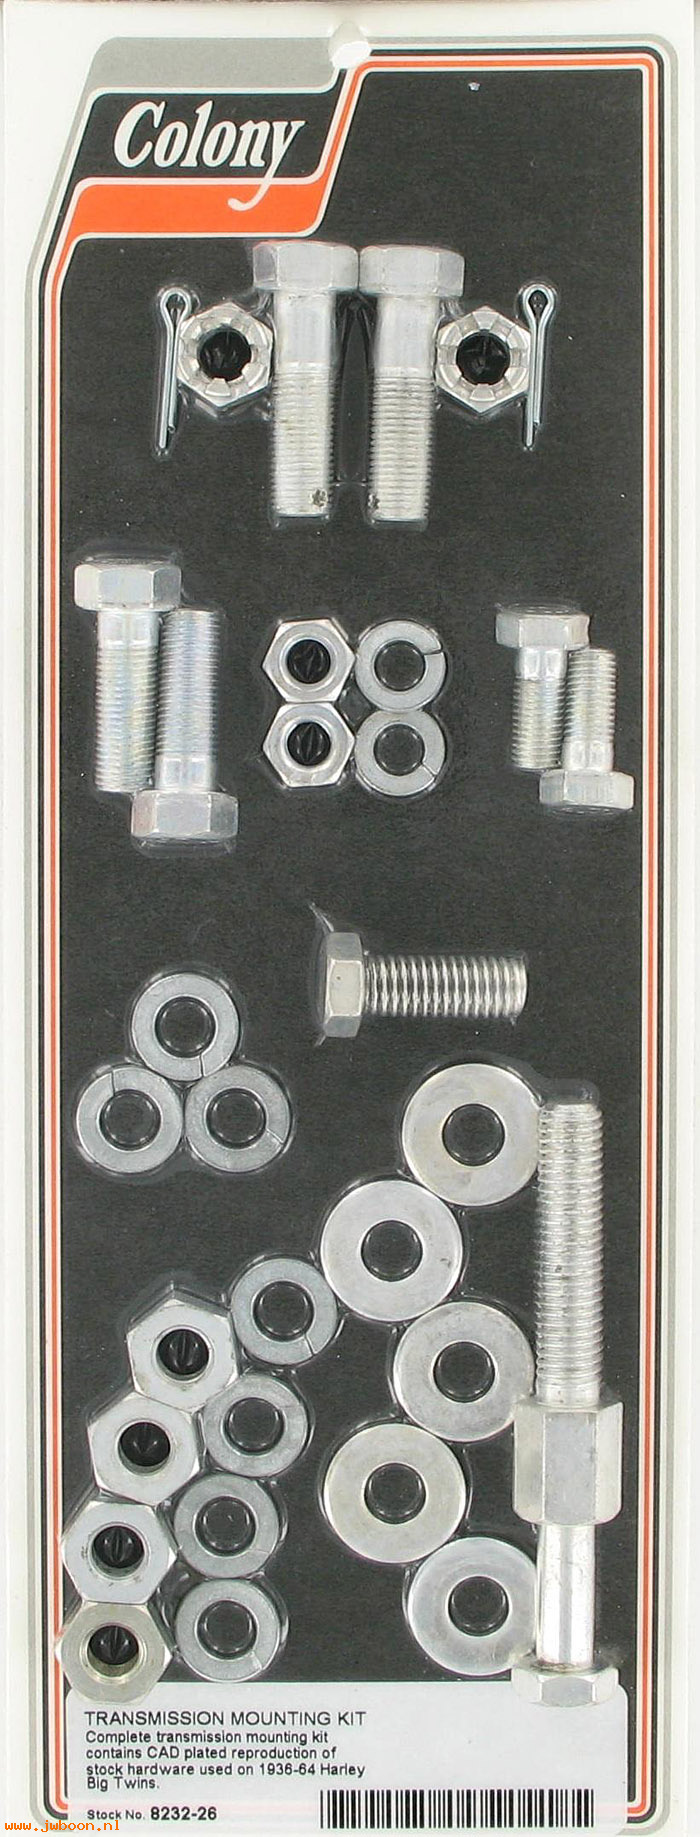 C 8232-26 (34735-36 / 7796): Transmission mounting kit "1035 CP" - Big Twins '36-'64, in stock